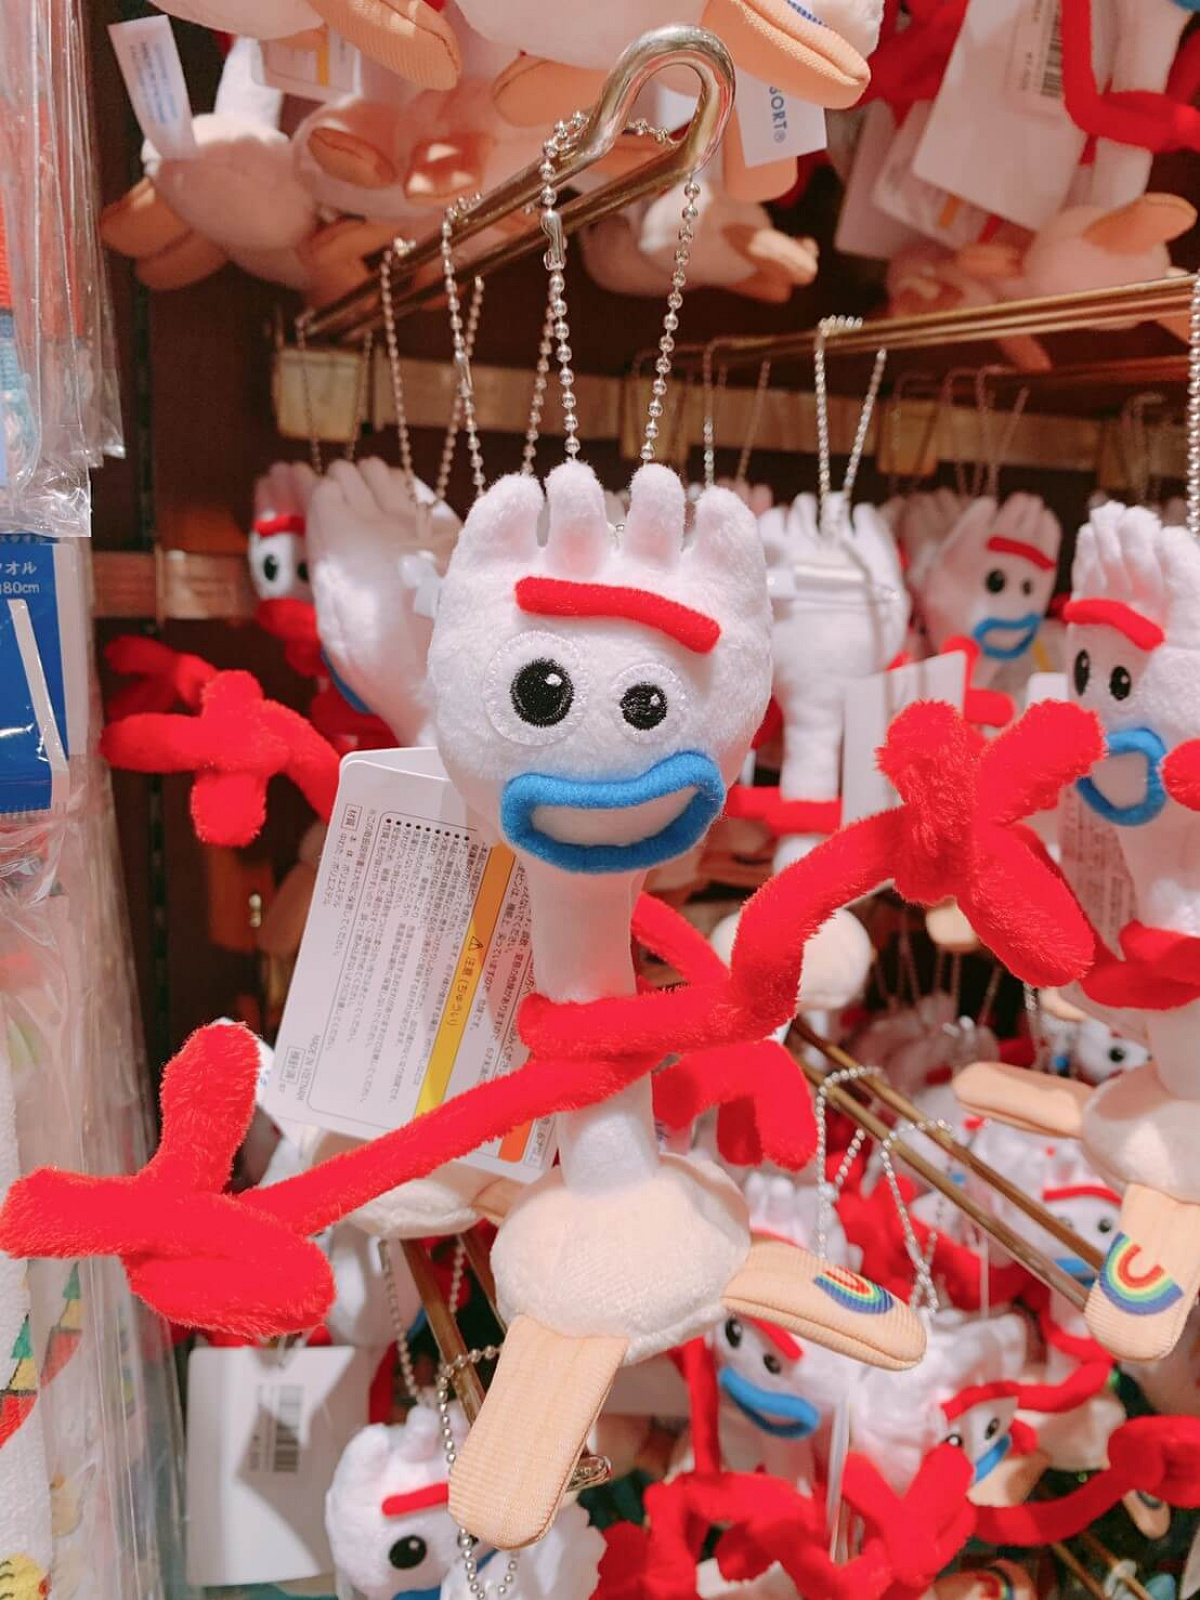 Forky is the most important toy to Bonnie right now.